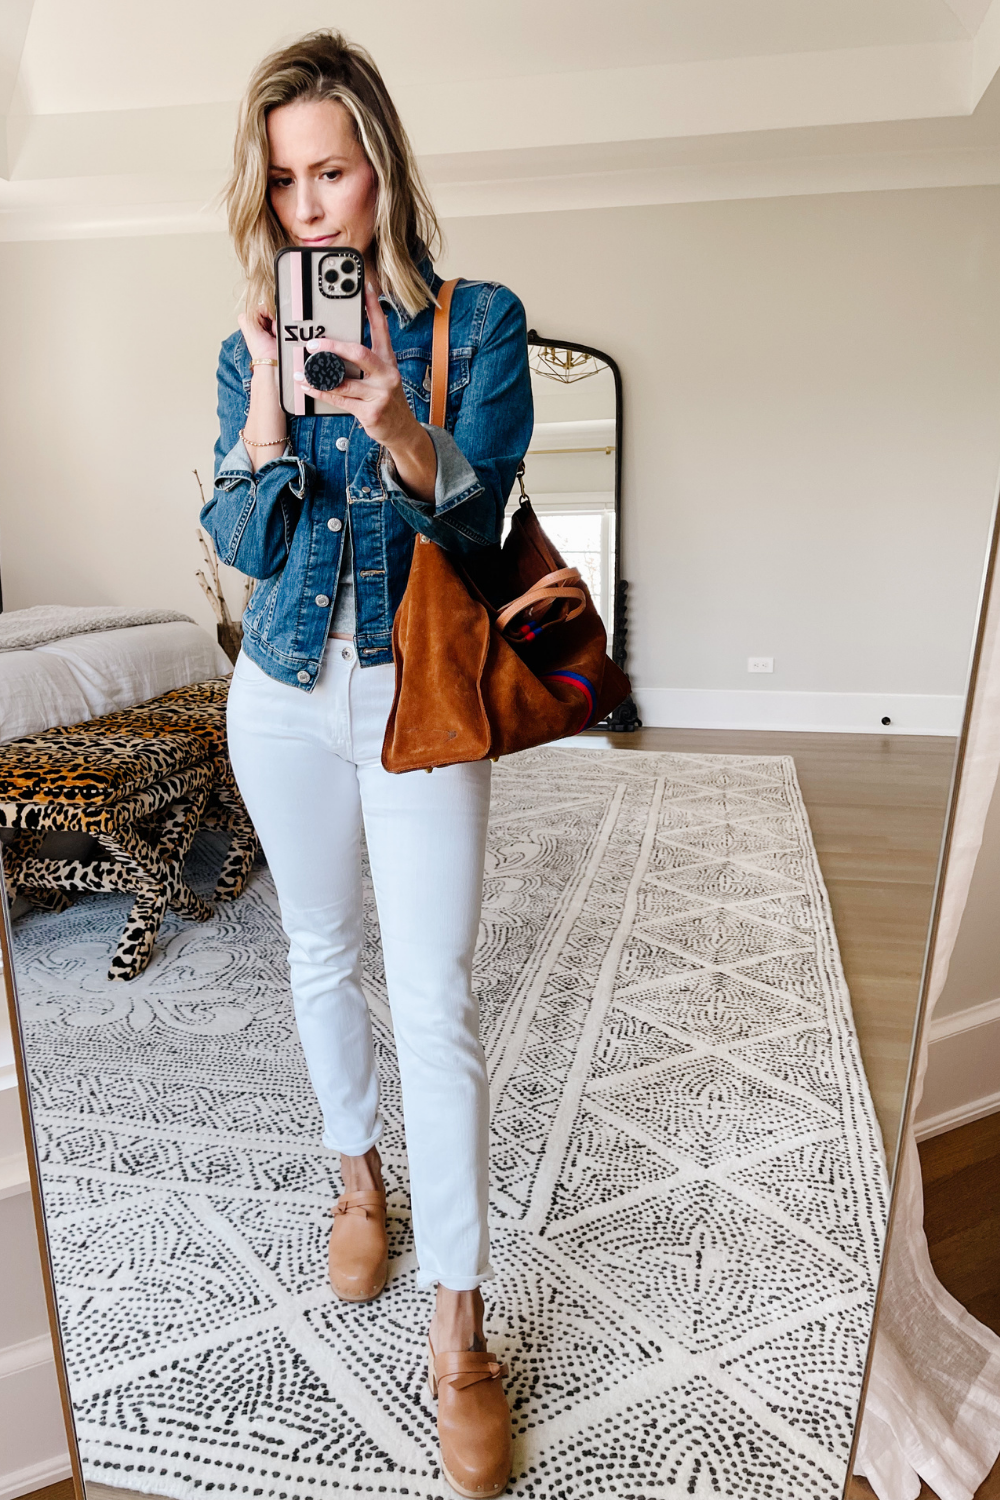 Suzanne wearing a denim jacket, white jeans, and clogs